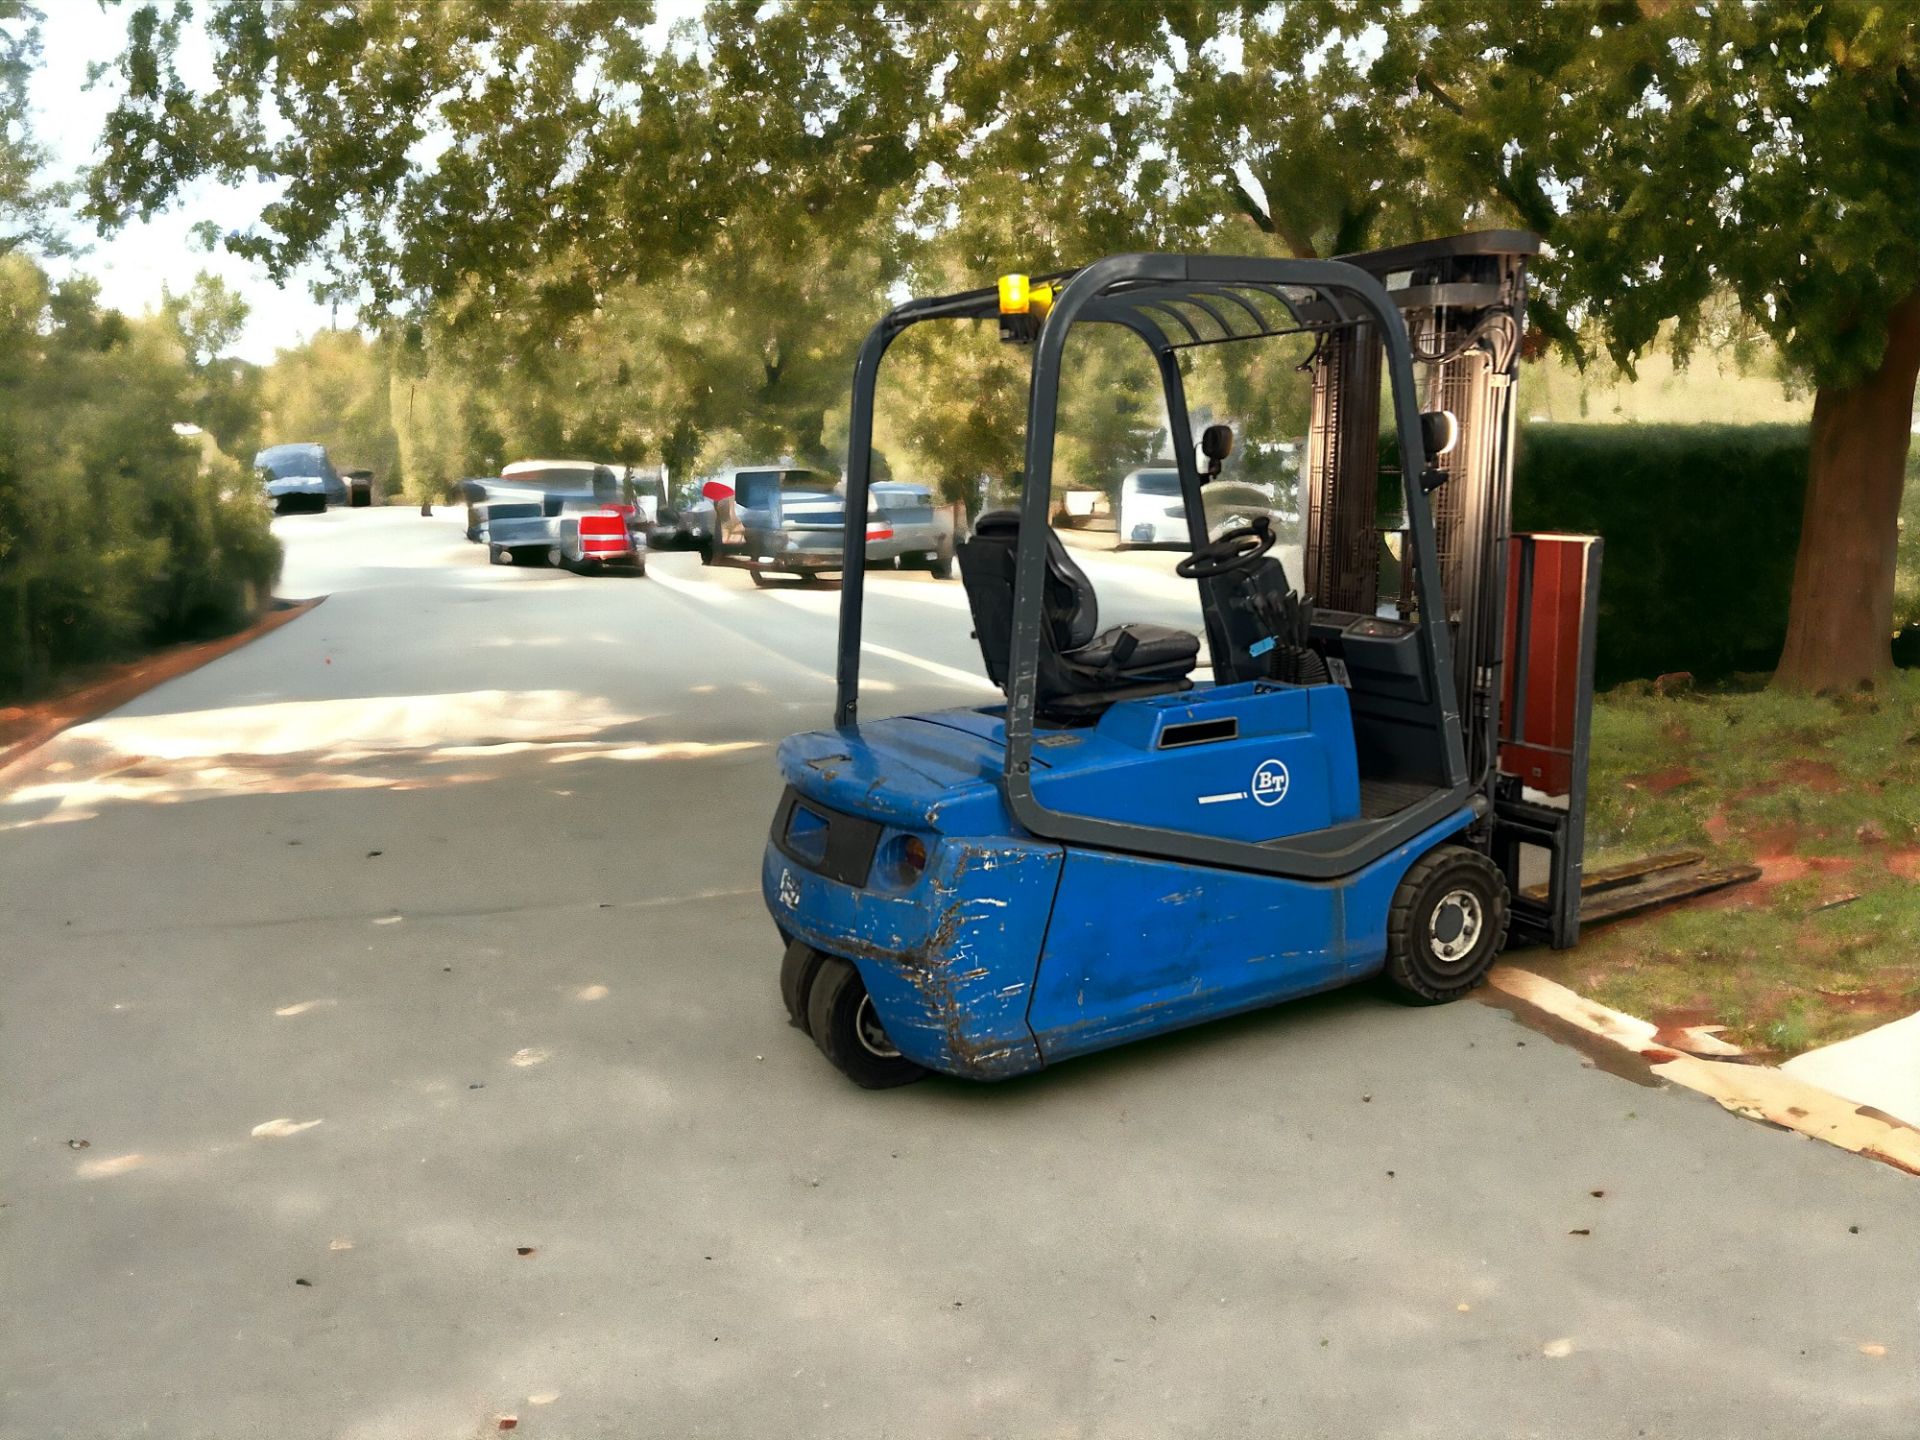 BT ELECTRIC 3-WHEEL FORKLIFT - MODEL CBE1.6T (2002) **(INCLUDES CHARGER)** - Image 6 of 6